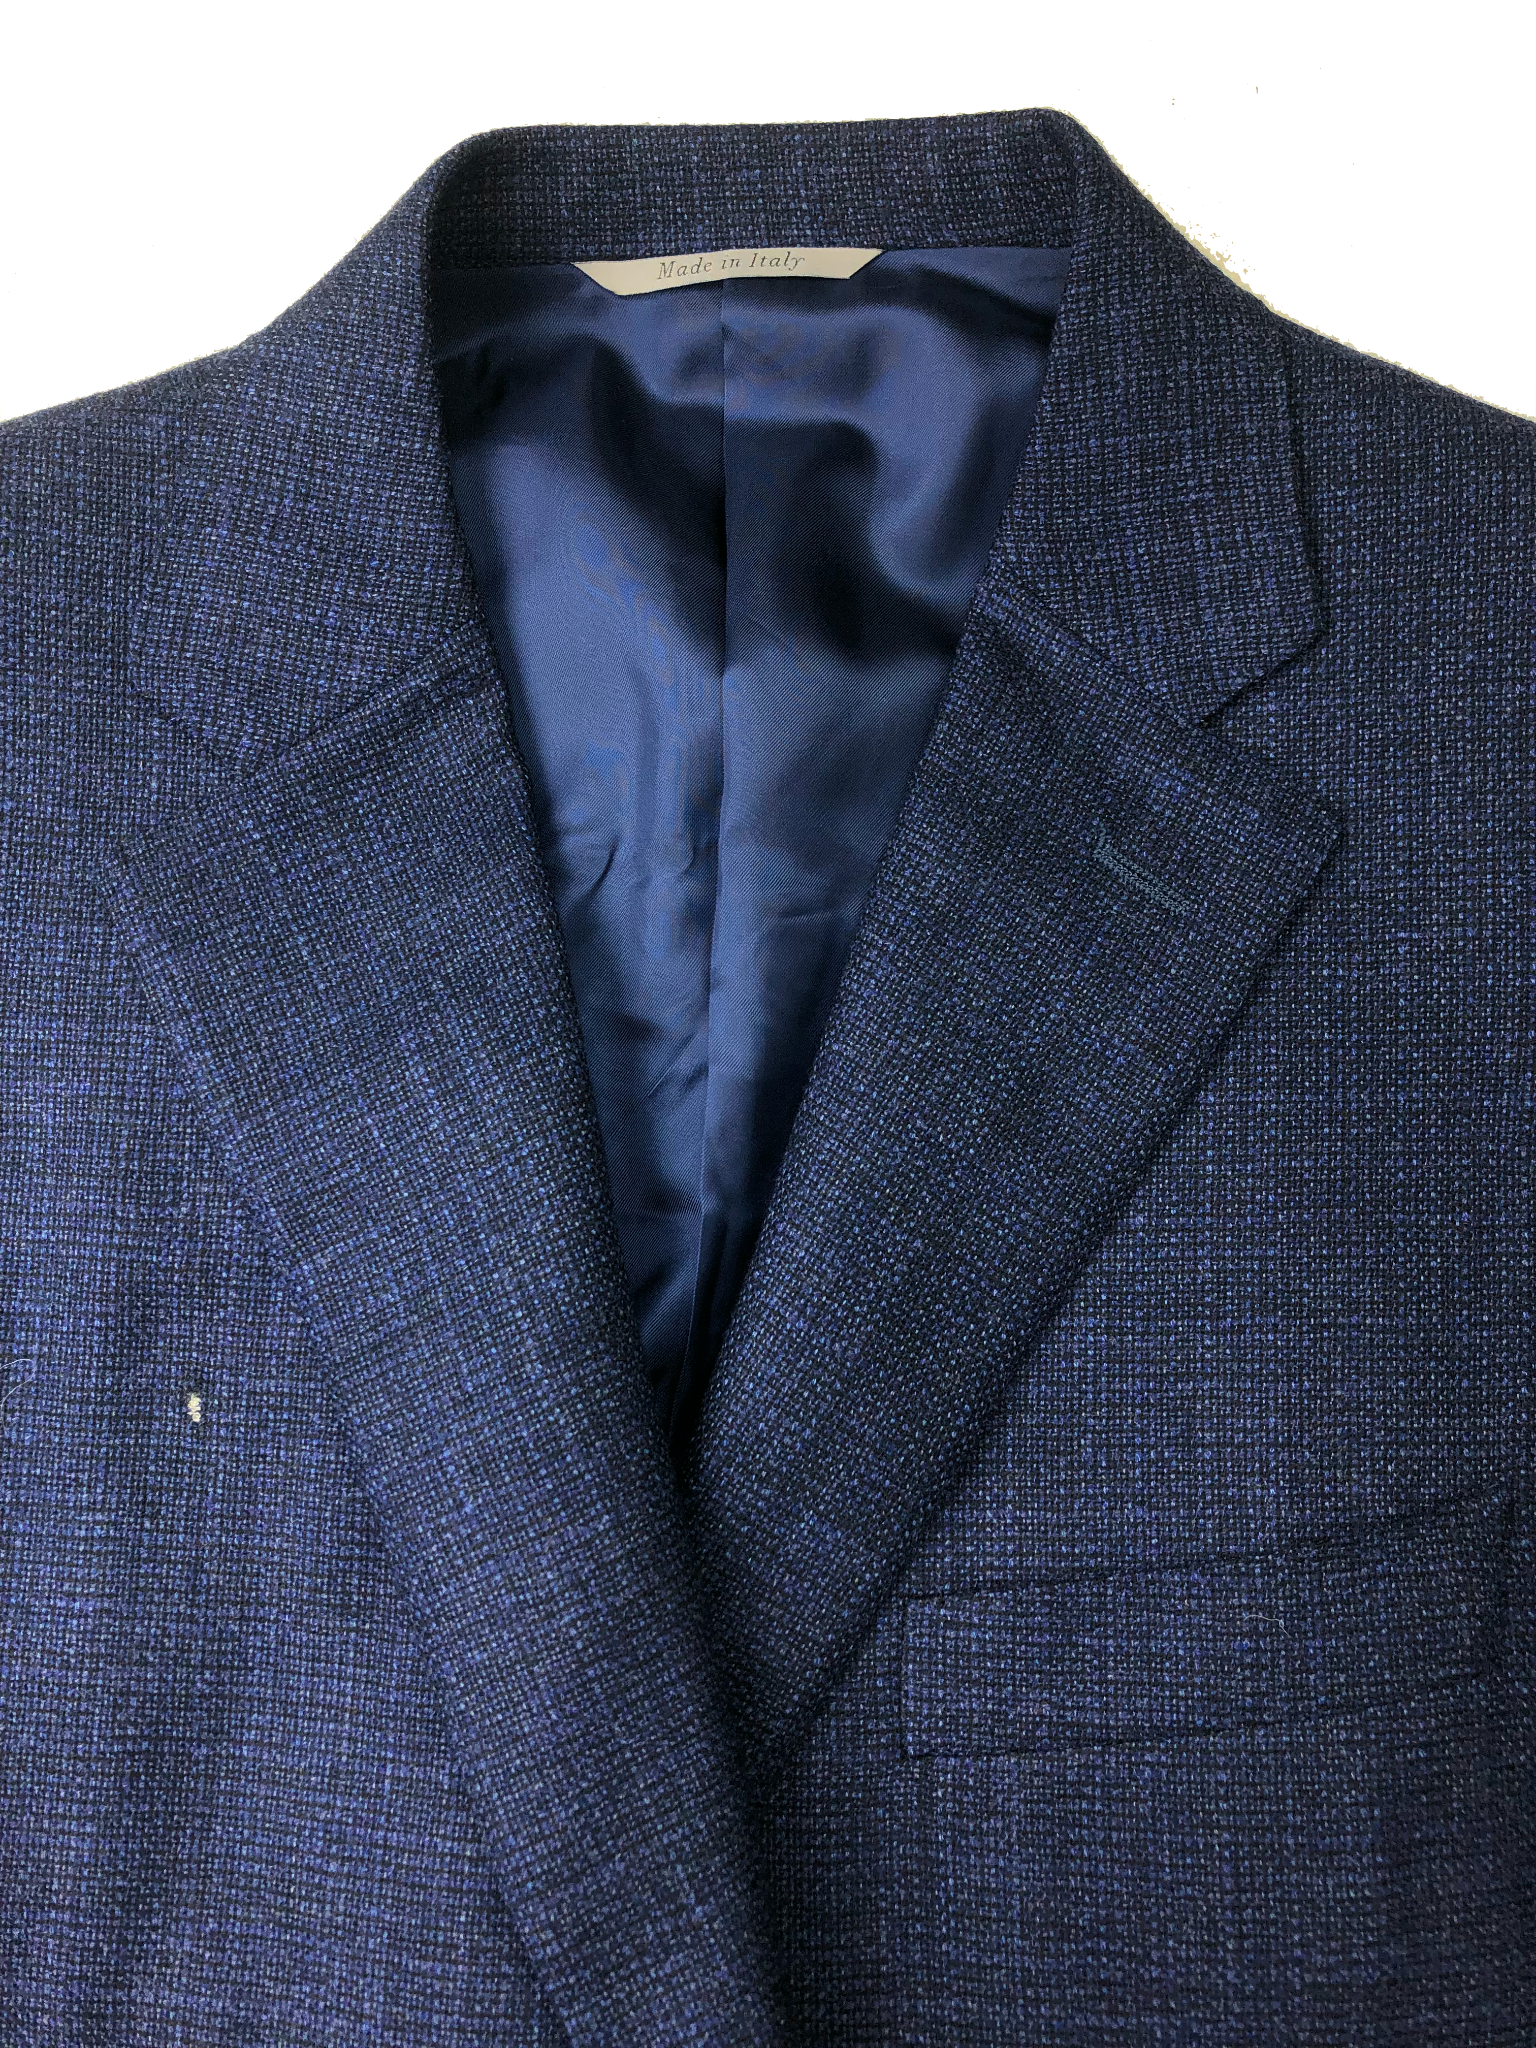 Canali Siena Textured Solid Classic Fit Sport Coat Navy Blue 42R *Small Hole*